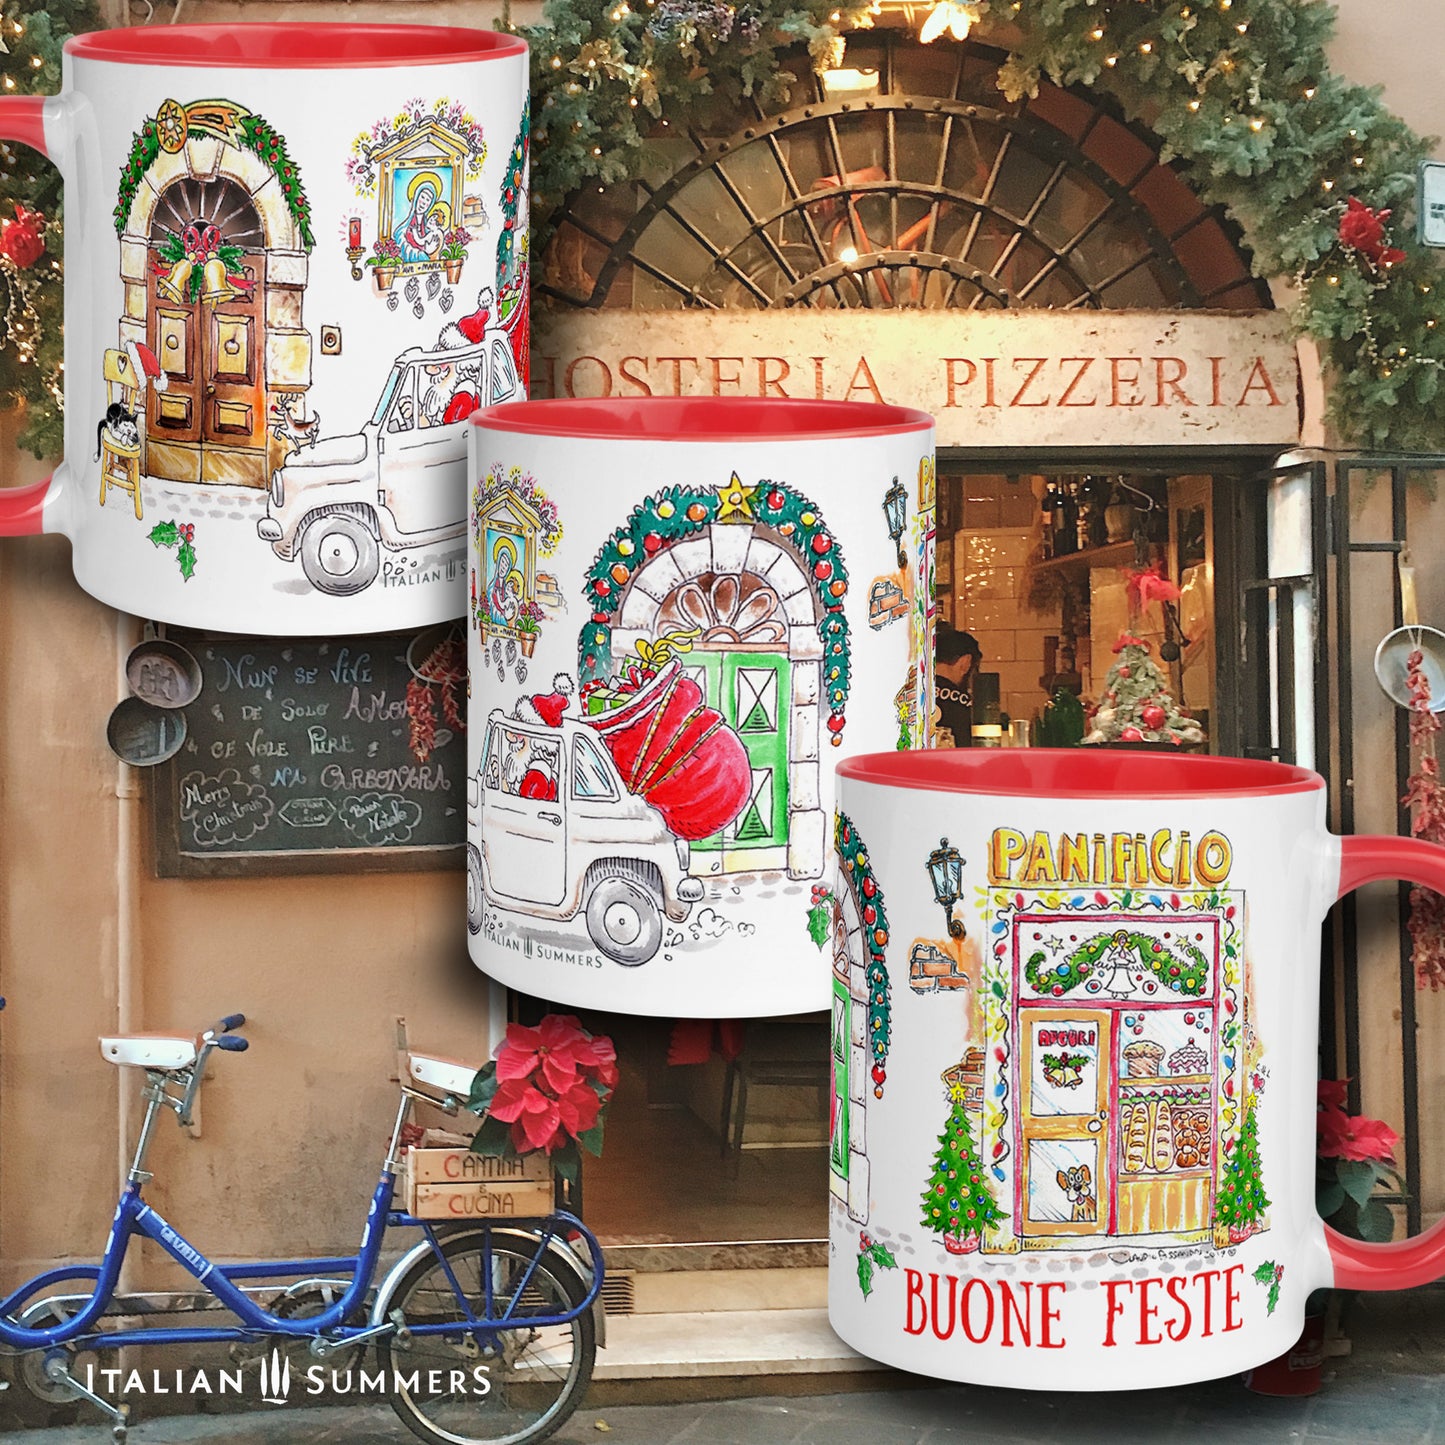 Mug Featuring Babbo Natale lovingly delivering presents through the streets of Italy, this mug is sure to get you in the holiday spirit.. Made by Italian Summers Copyrighted material